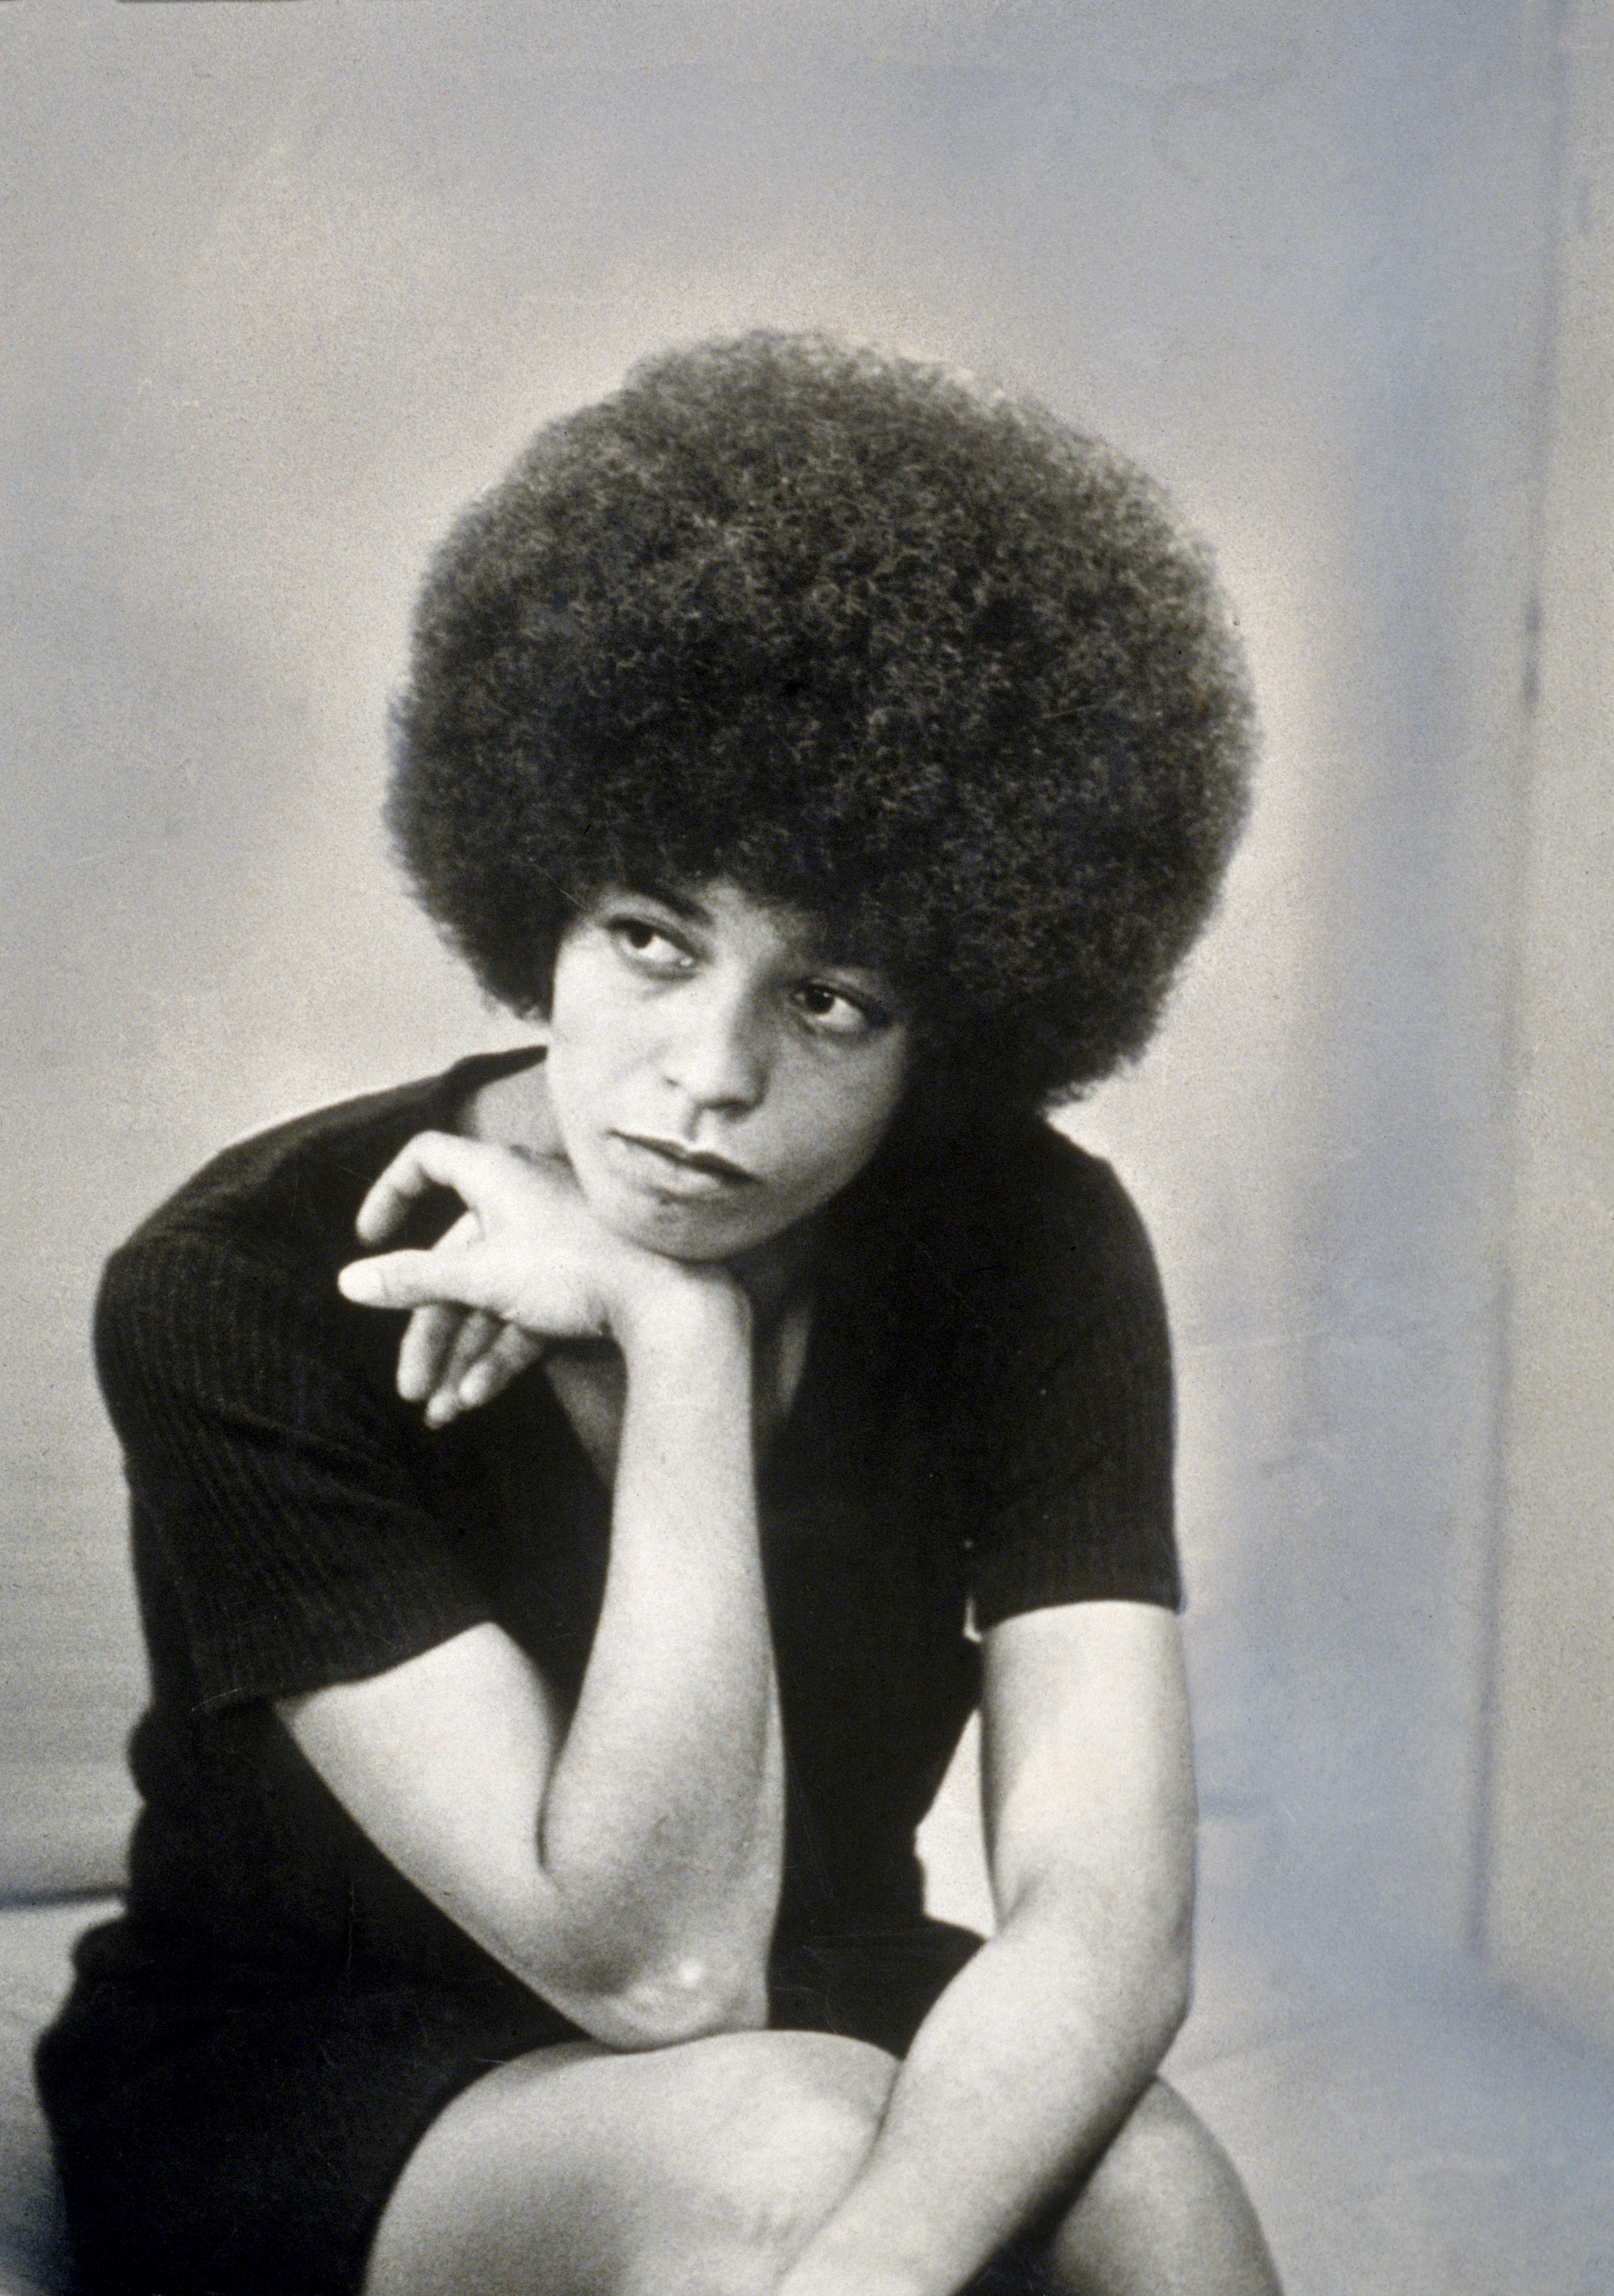 Angela Davis, the U.S. Angela Davis, a political activist, scholar and author, was accused of supplying the gun in the death of a federal judge. She fled, landing her a spot on the Most Wanted list. Davis was caught in New York but was acquitted in 1972, backed by activist supporters who demanded her freedom.